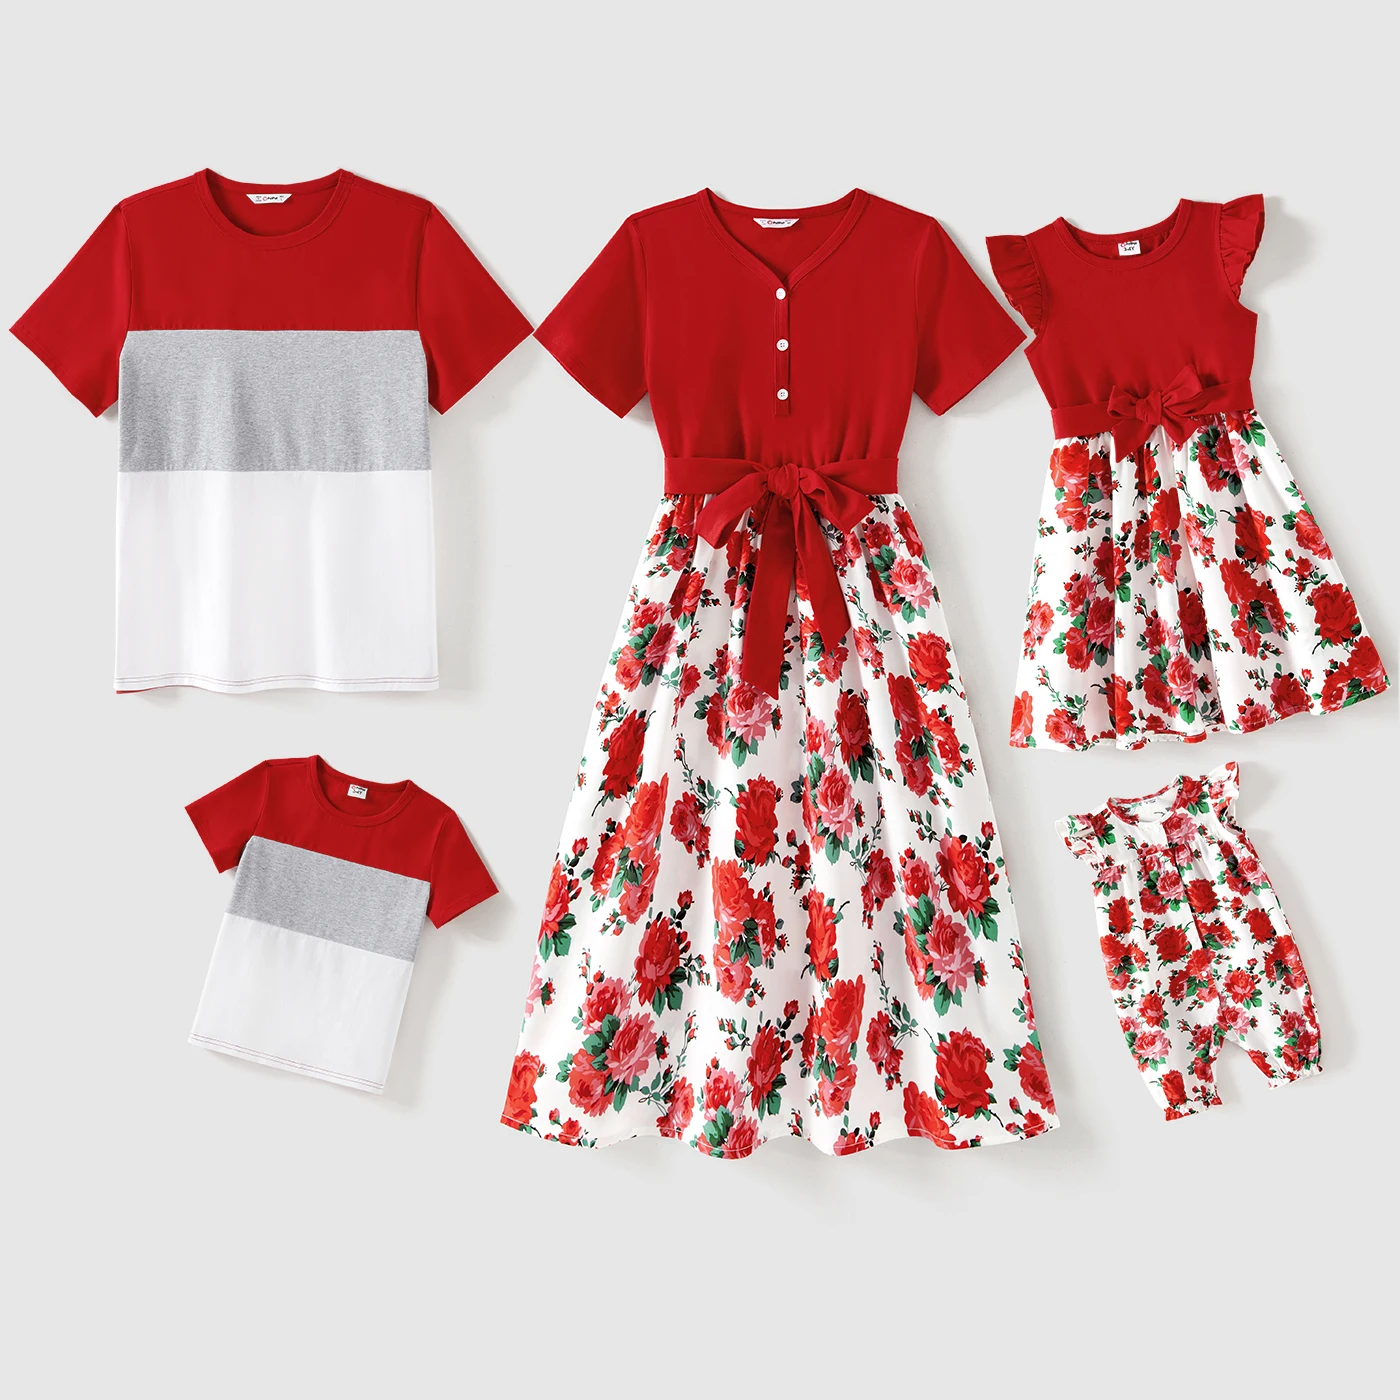 

PatPat Family Matching Outfits 95% Cotton Short-sleeve Colorblock T-shirts and Floral Print Spliced Dresses Sets